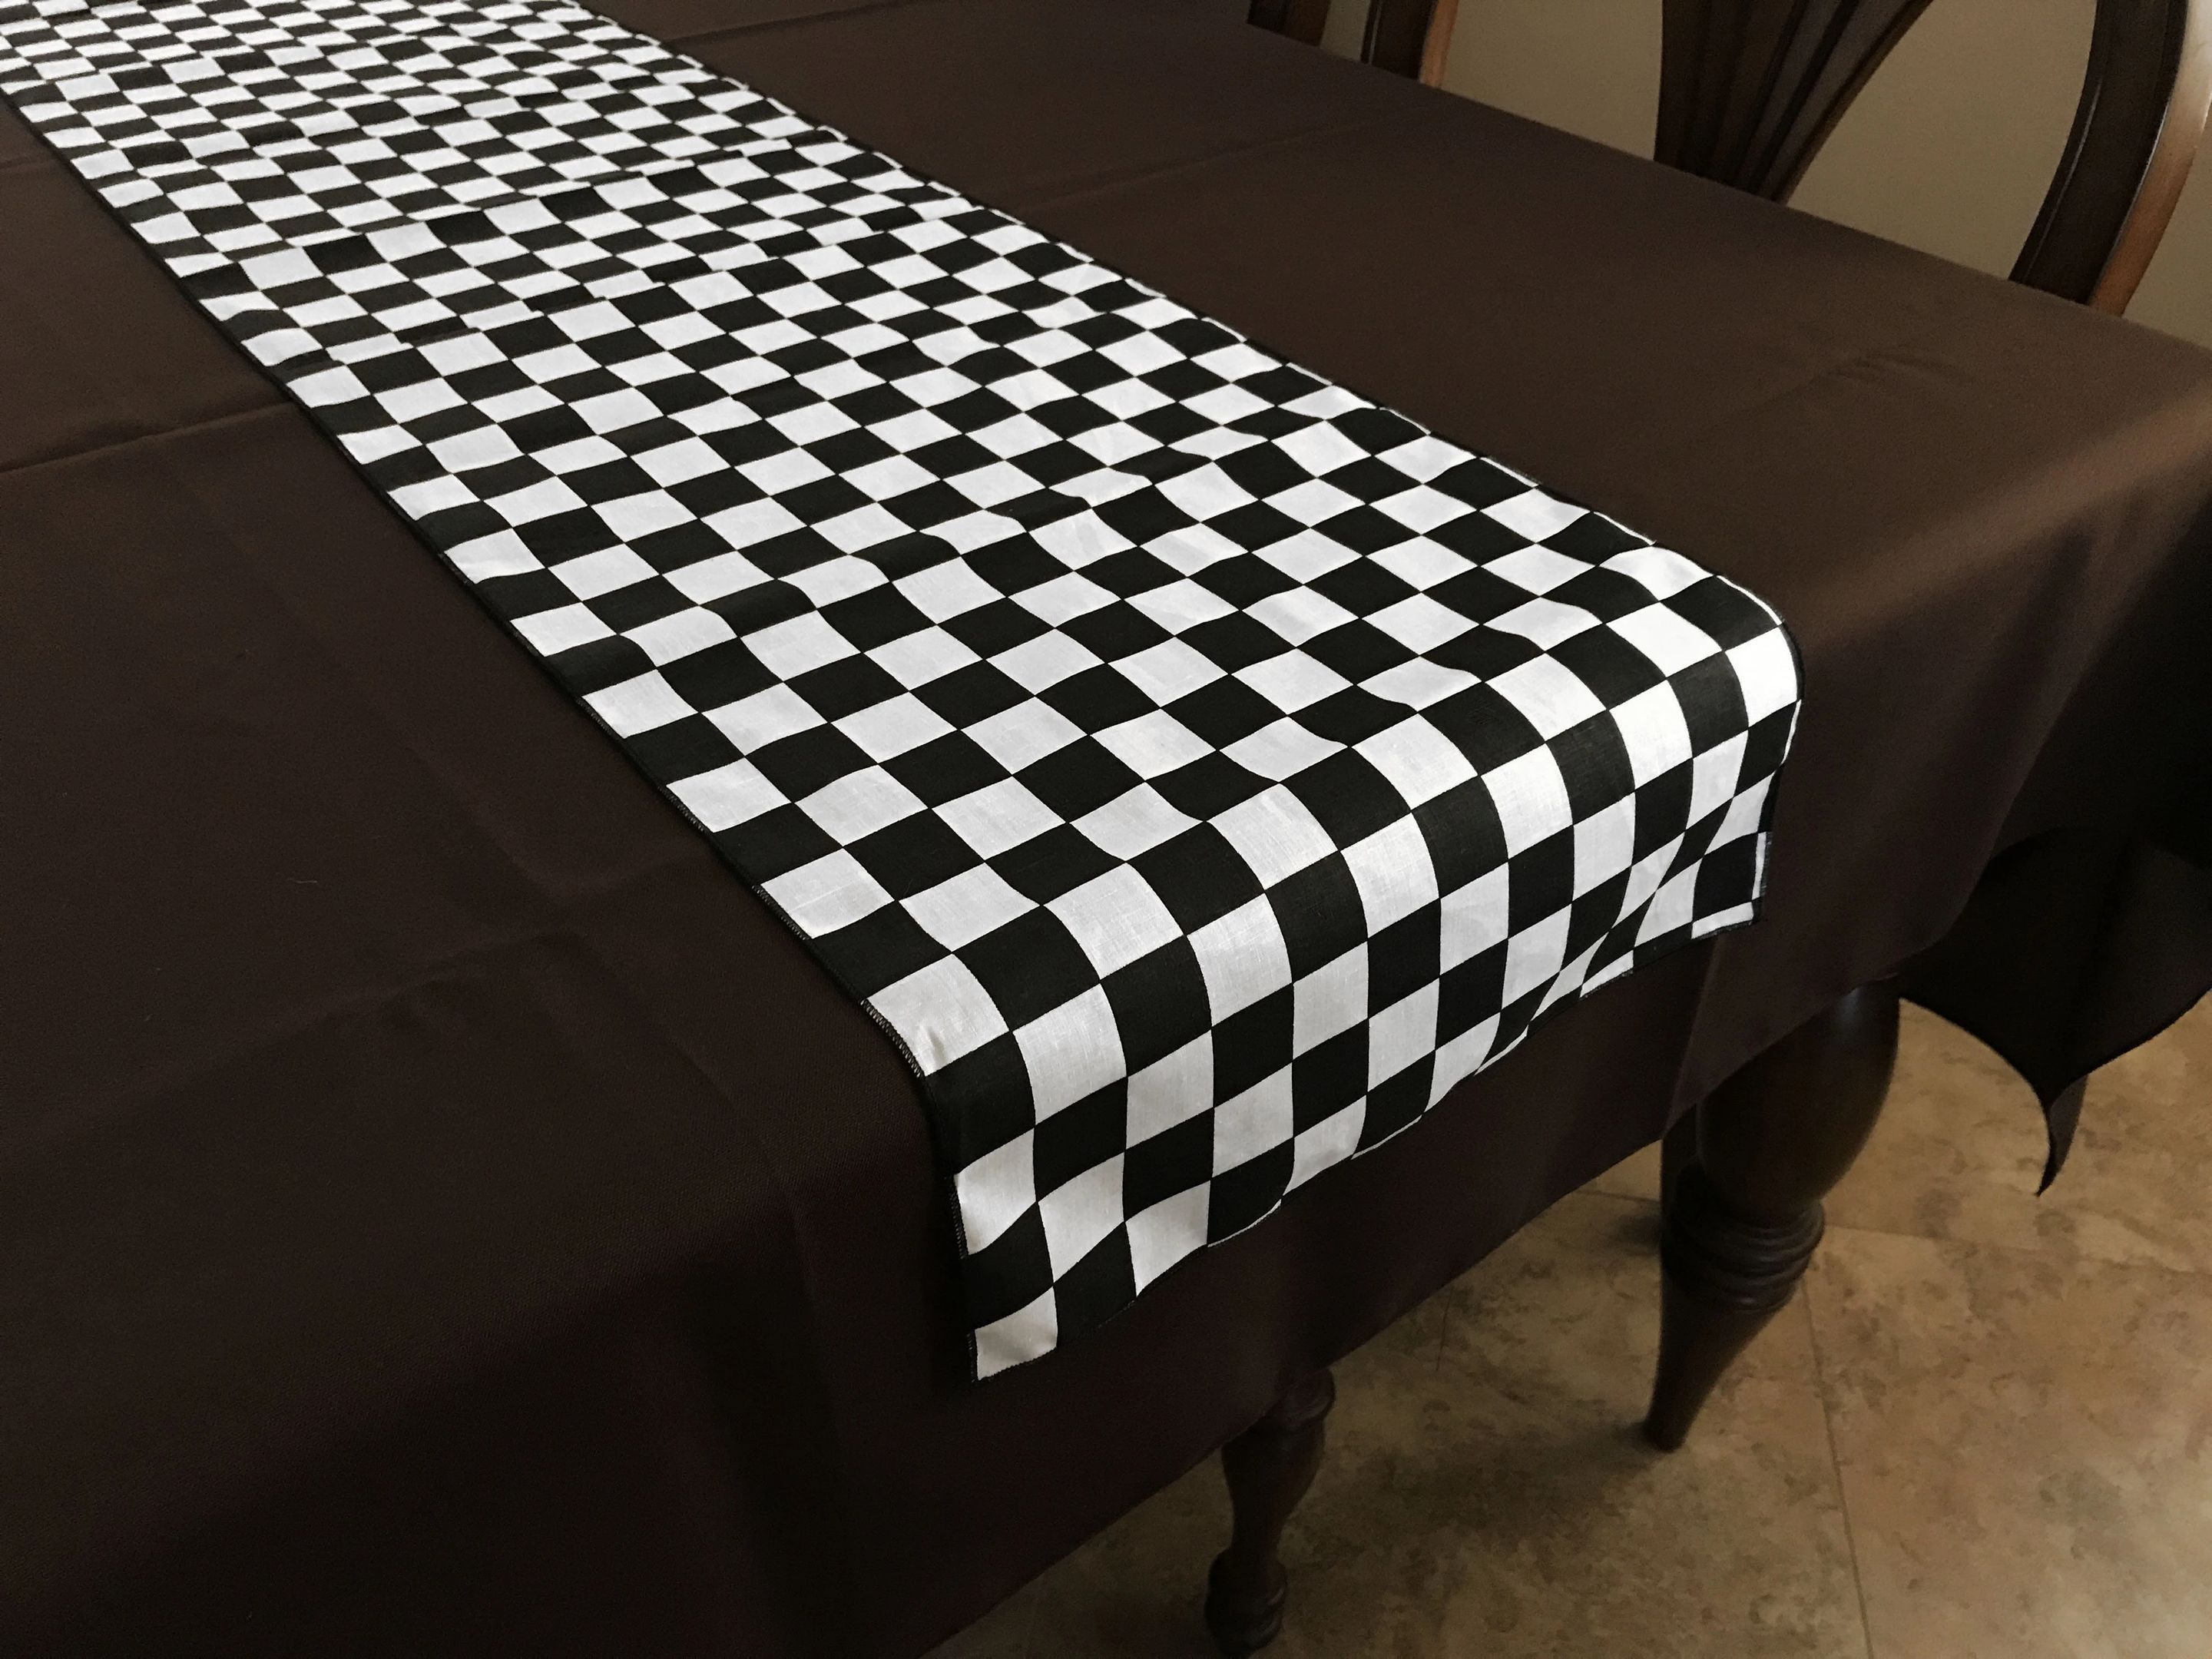 printed table runner background checkerboard white black 4263 scaled